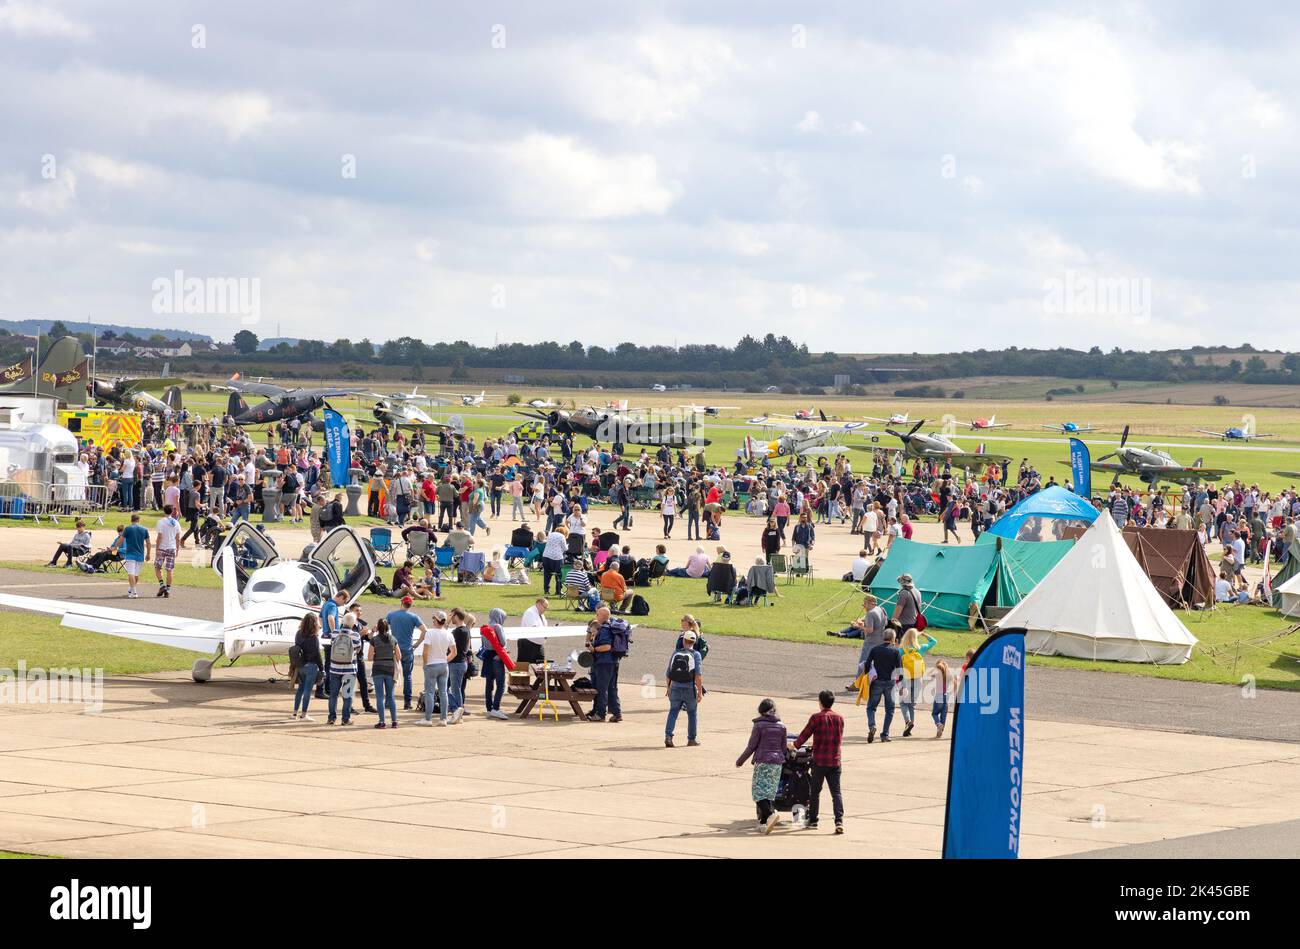 Duxford airshow - Crowds of visitors at the Battle of Britain Airshow UK; Imperial War Museum, Duxford, Cambridgeshire UK Stock Photo